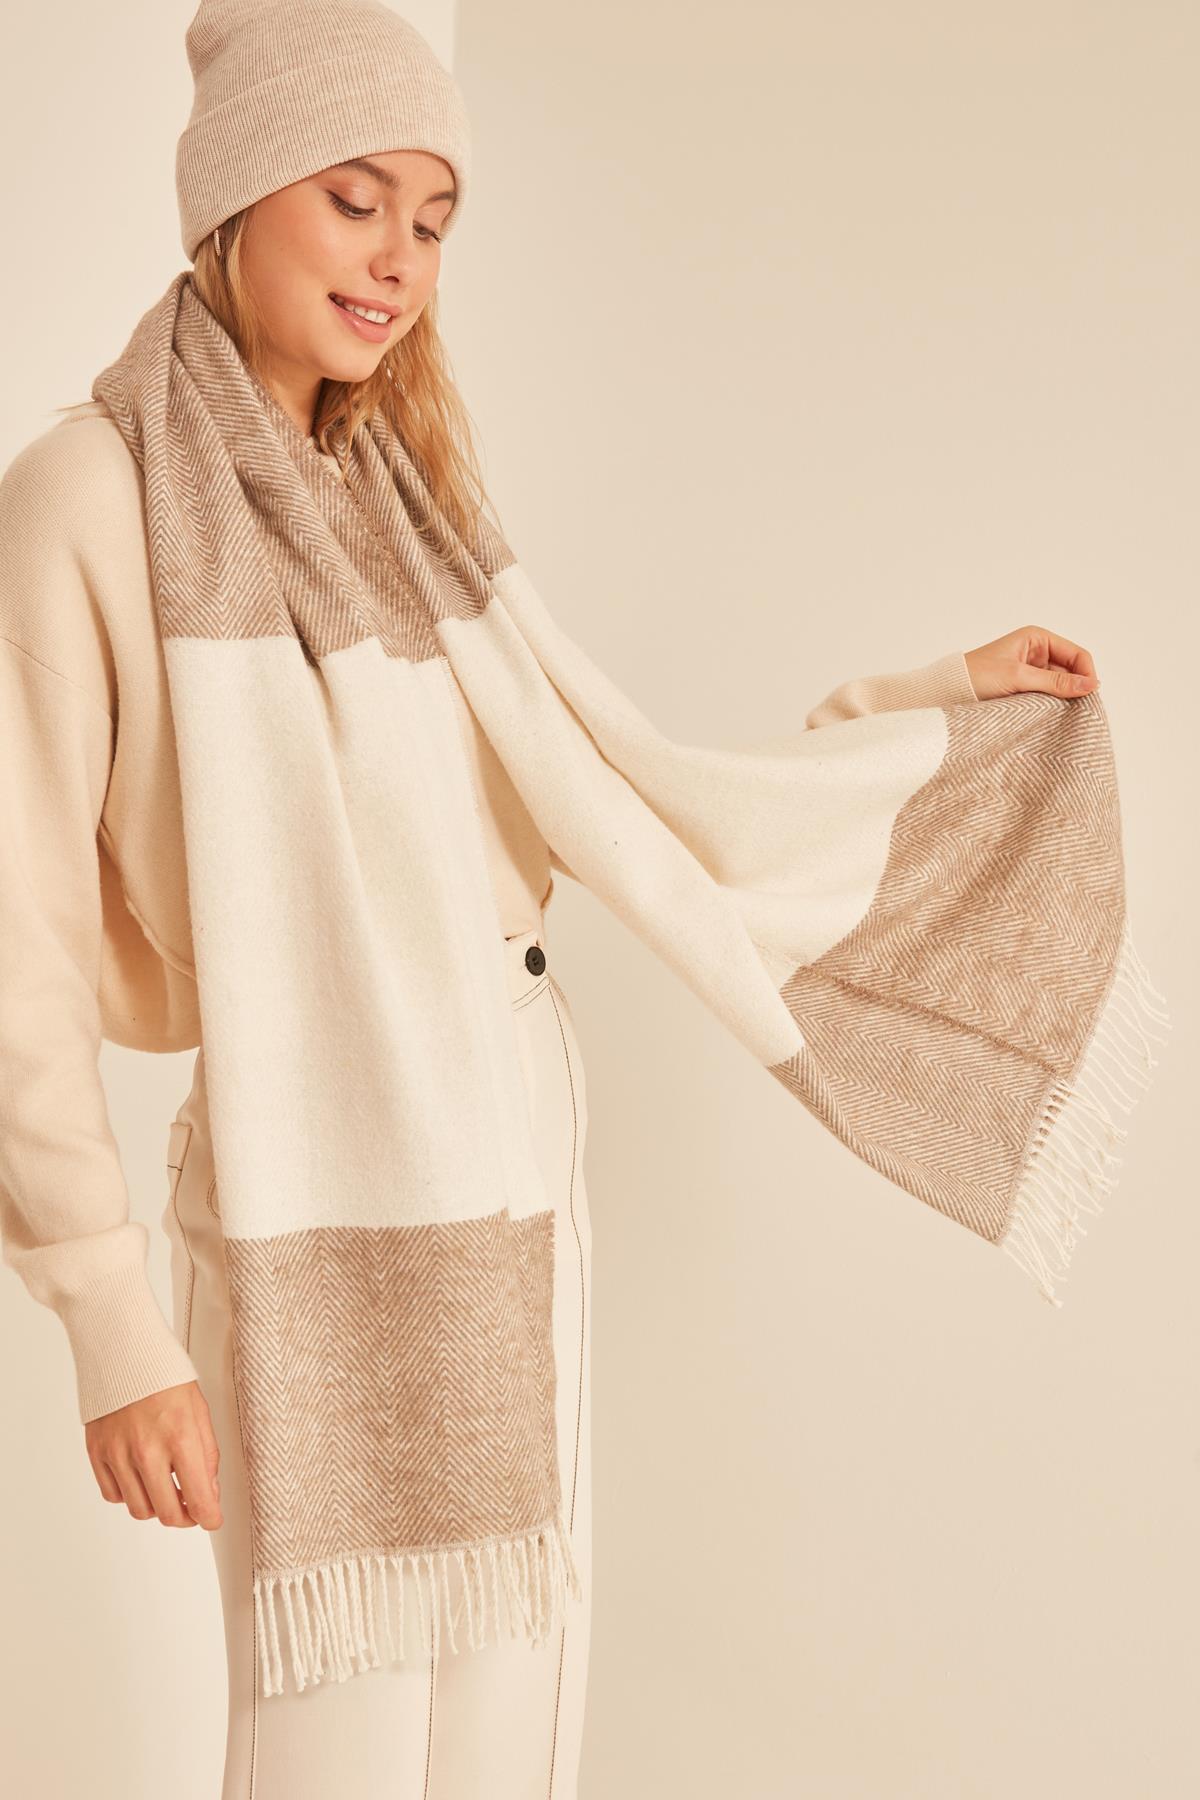 A model wears NSV10841 - Soft Textured Herringbone Pattern -ecru Thick Shoulder Shawl - Beige, wholesale Shawl of Nesvay to display at Lonca